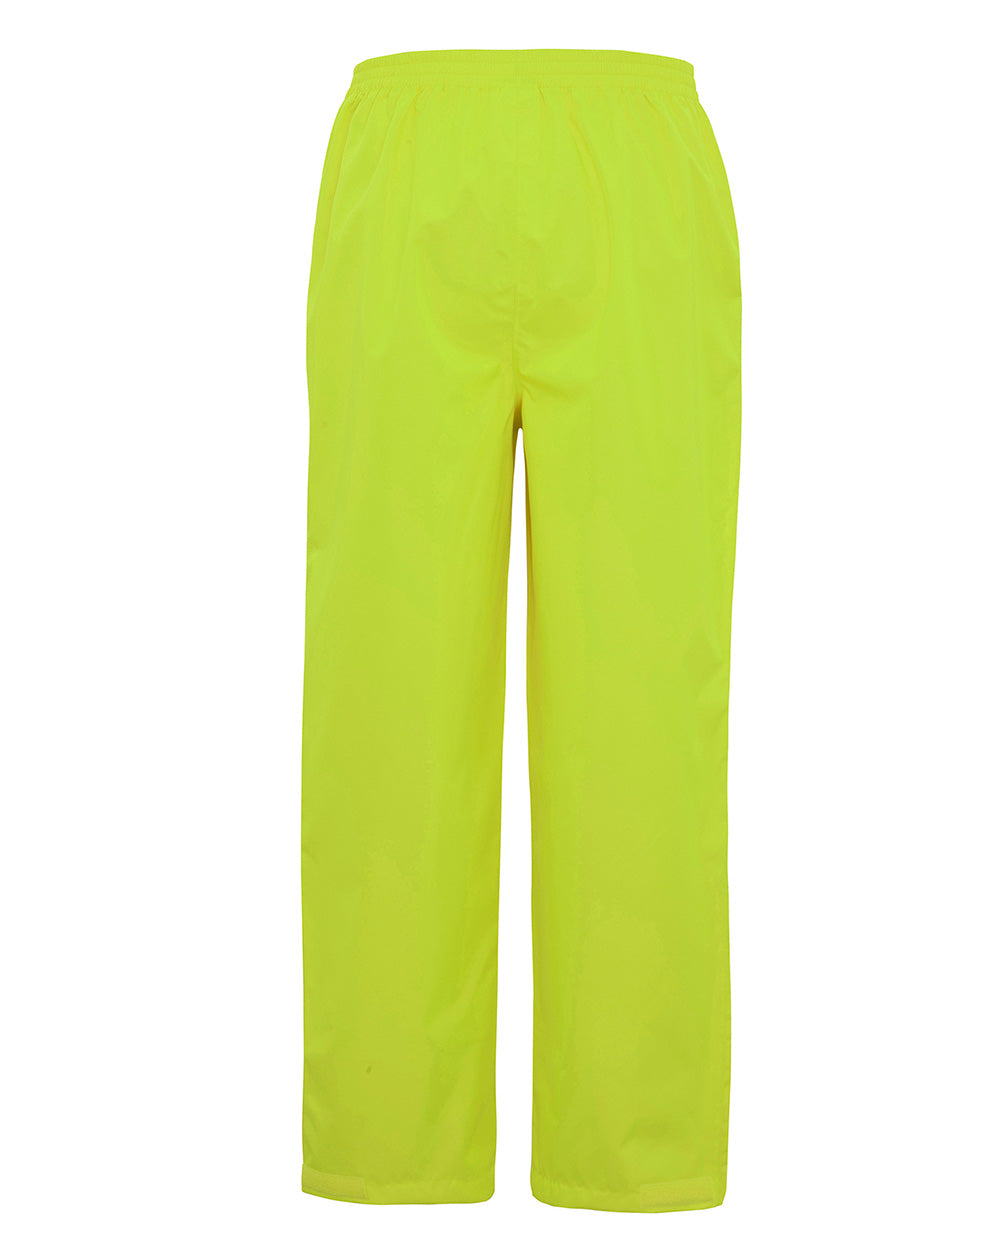 Ultimate Overpant in Fluoro Yellow